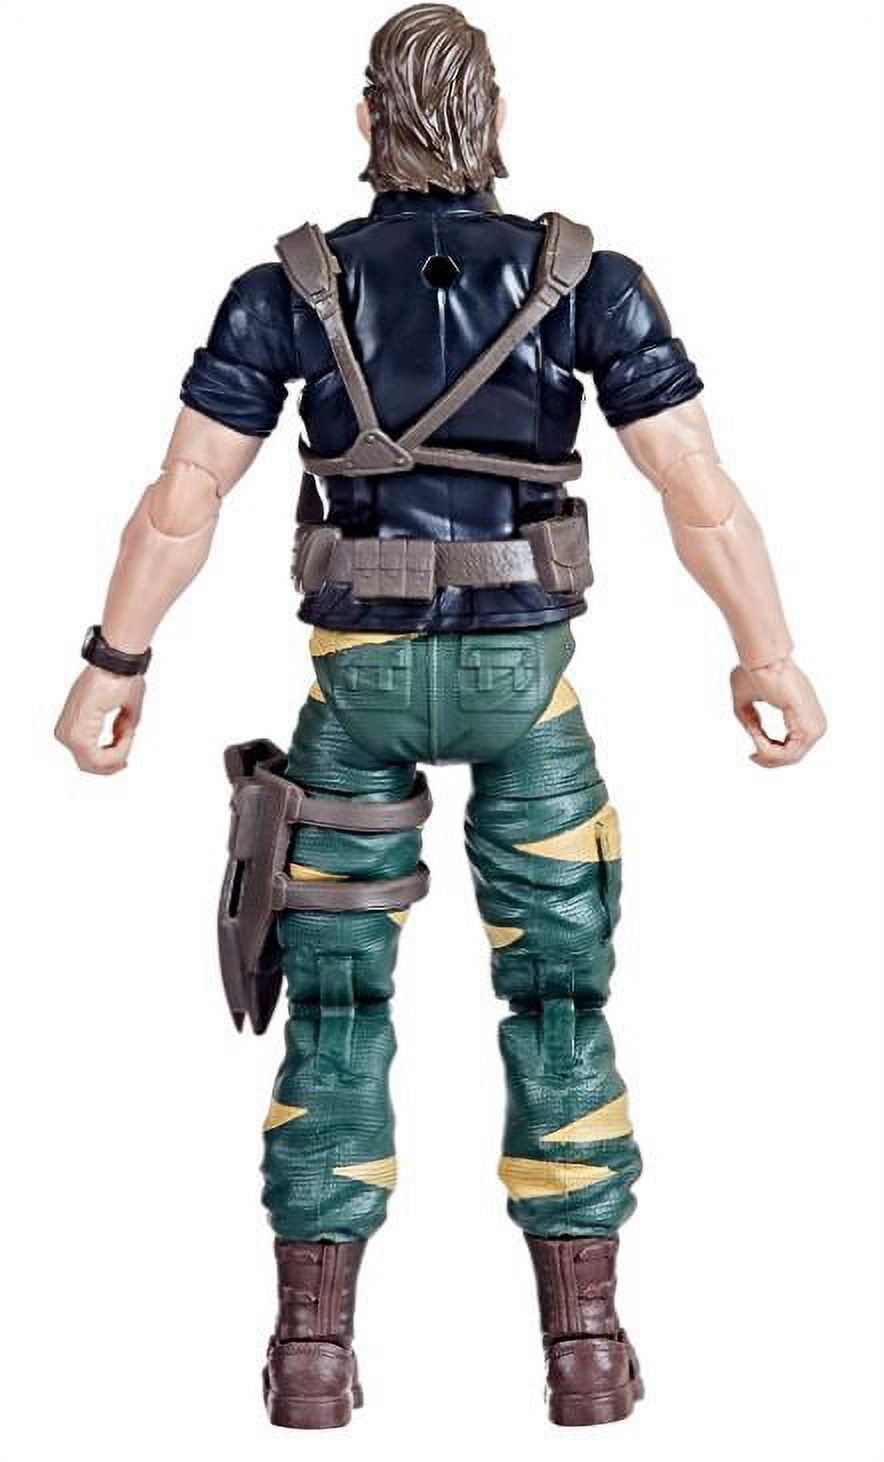 G.I. Joe Classified Series Tiger Force Recondo Action Figure - image 4 of 5